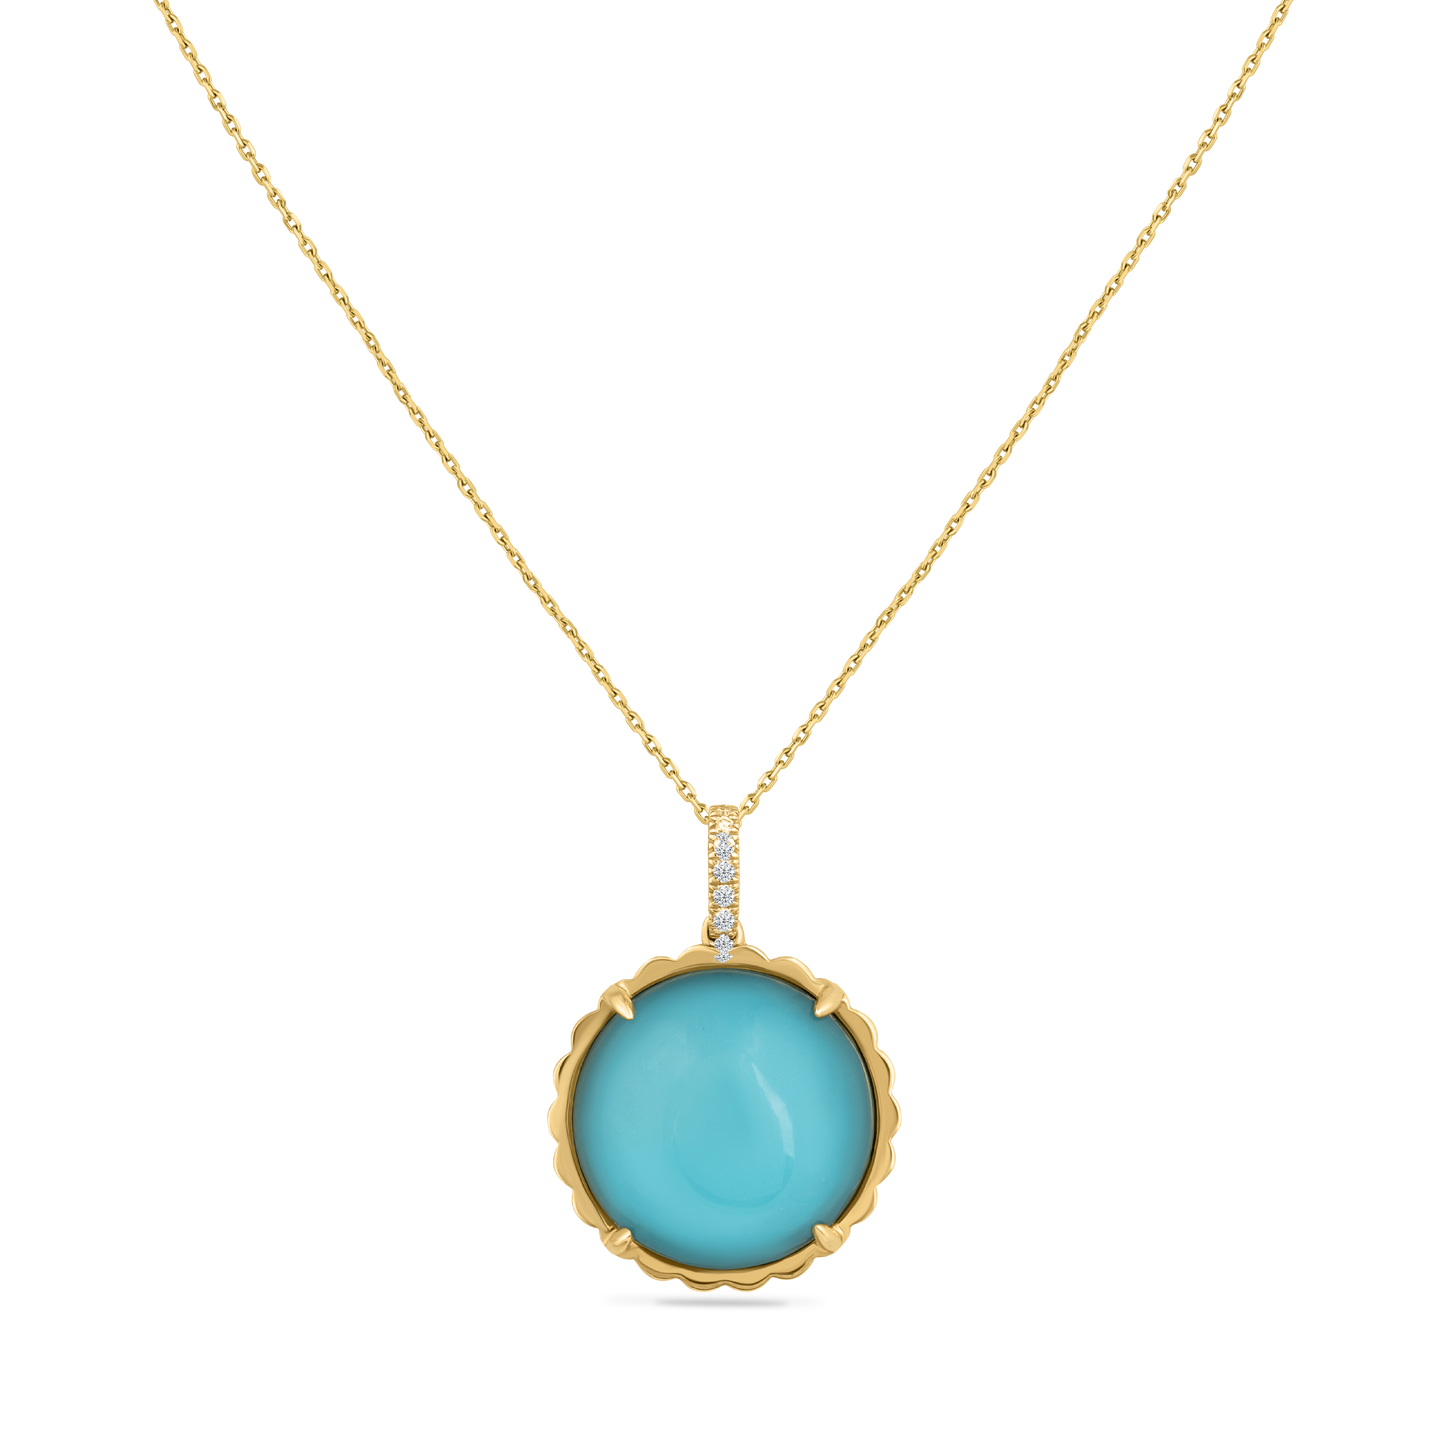 14K DOUBLET PENDANT IN WHITE TOPAZ AND RECON TURQUOISE WITH 11 DIAMONDS 0.07CT ON 18 INCHES CABLE CHAIN